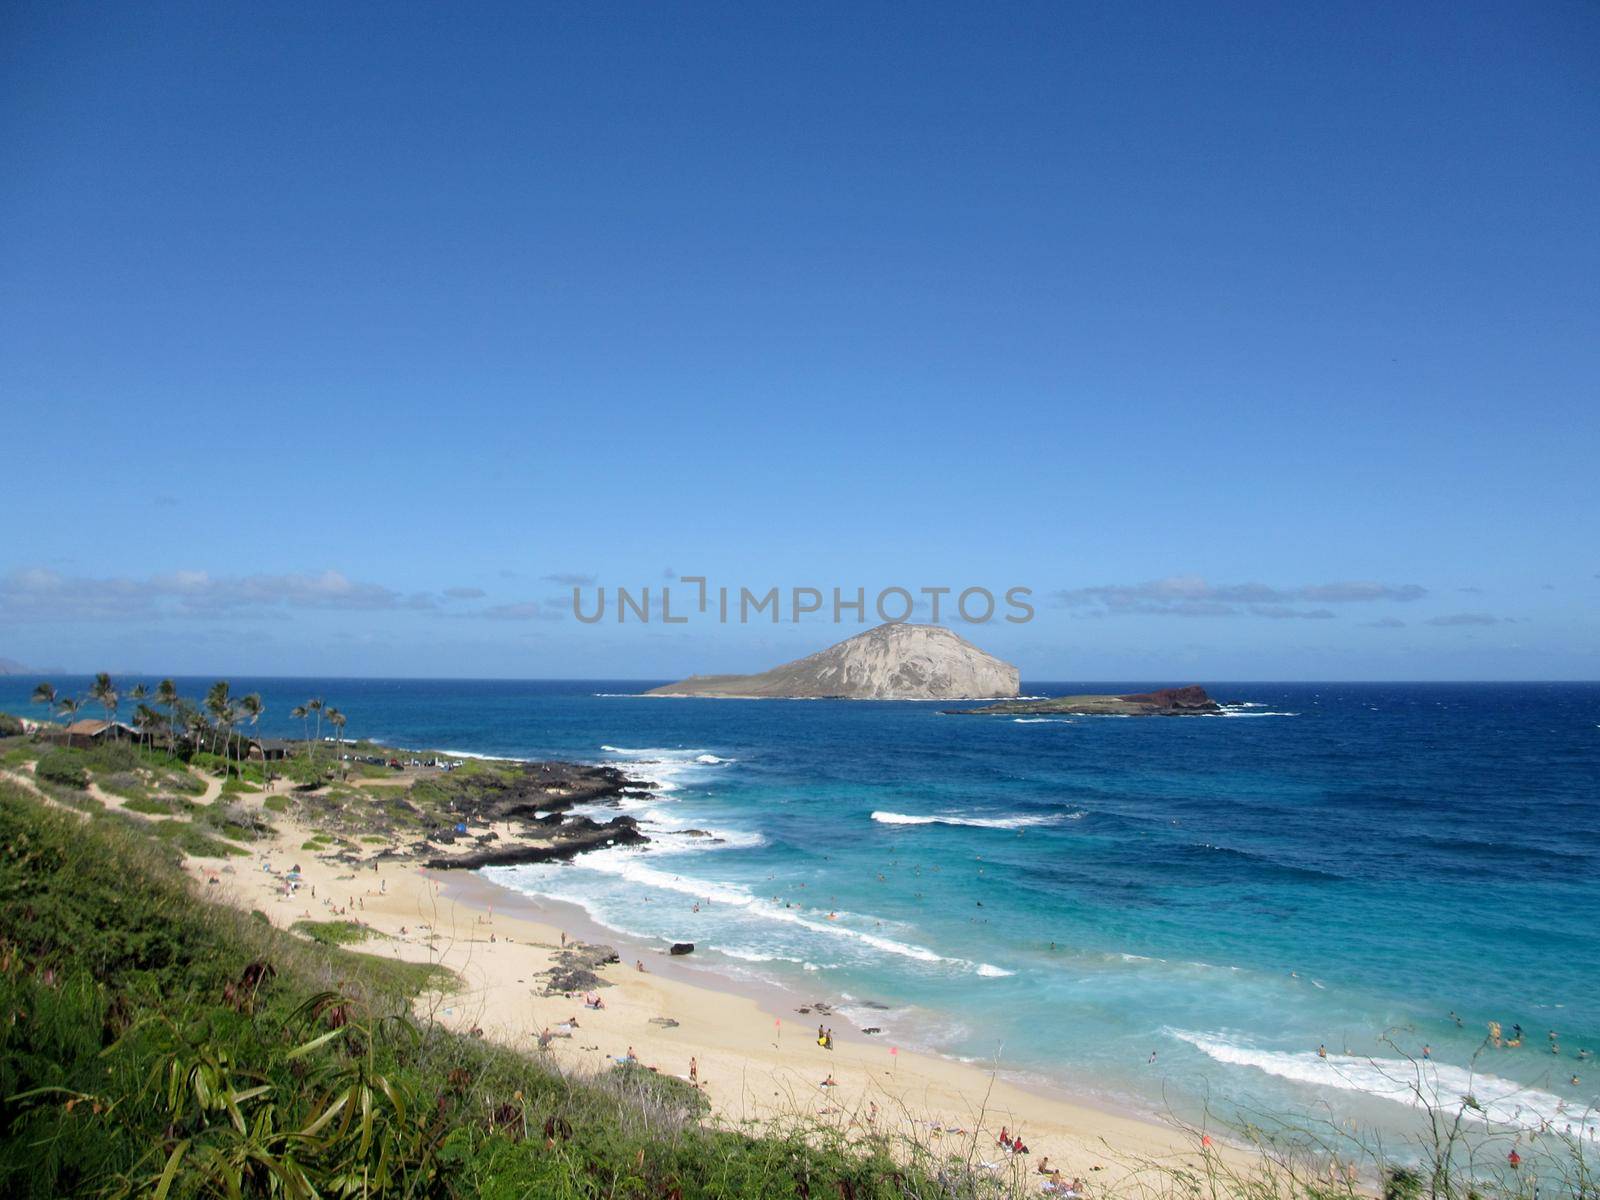 People play at the beach and in surf with view of Rabbit and Rock islands on a clear day at Makapuu Beach Park, Oahu, Hawaii.                              